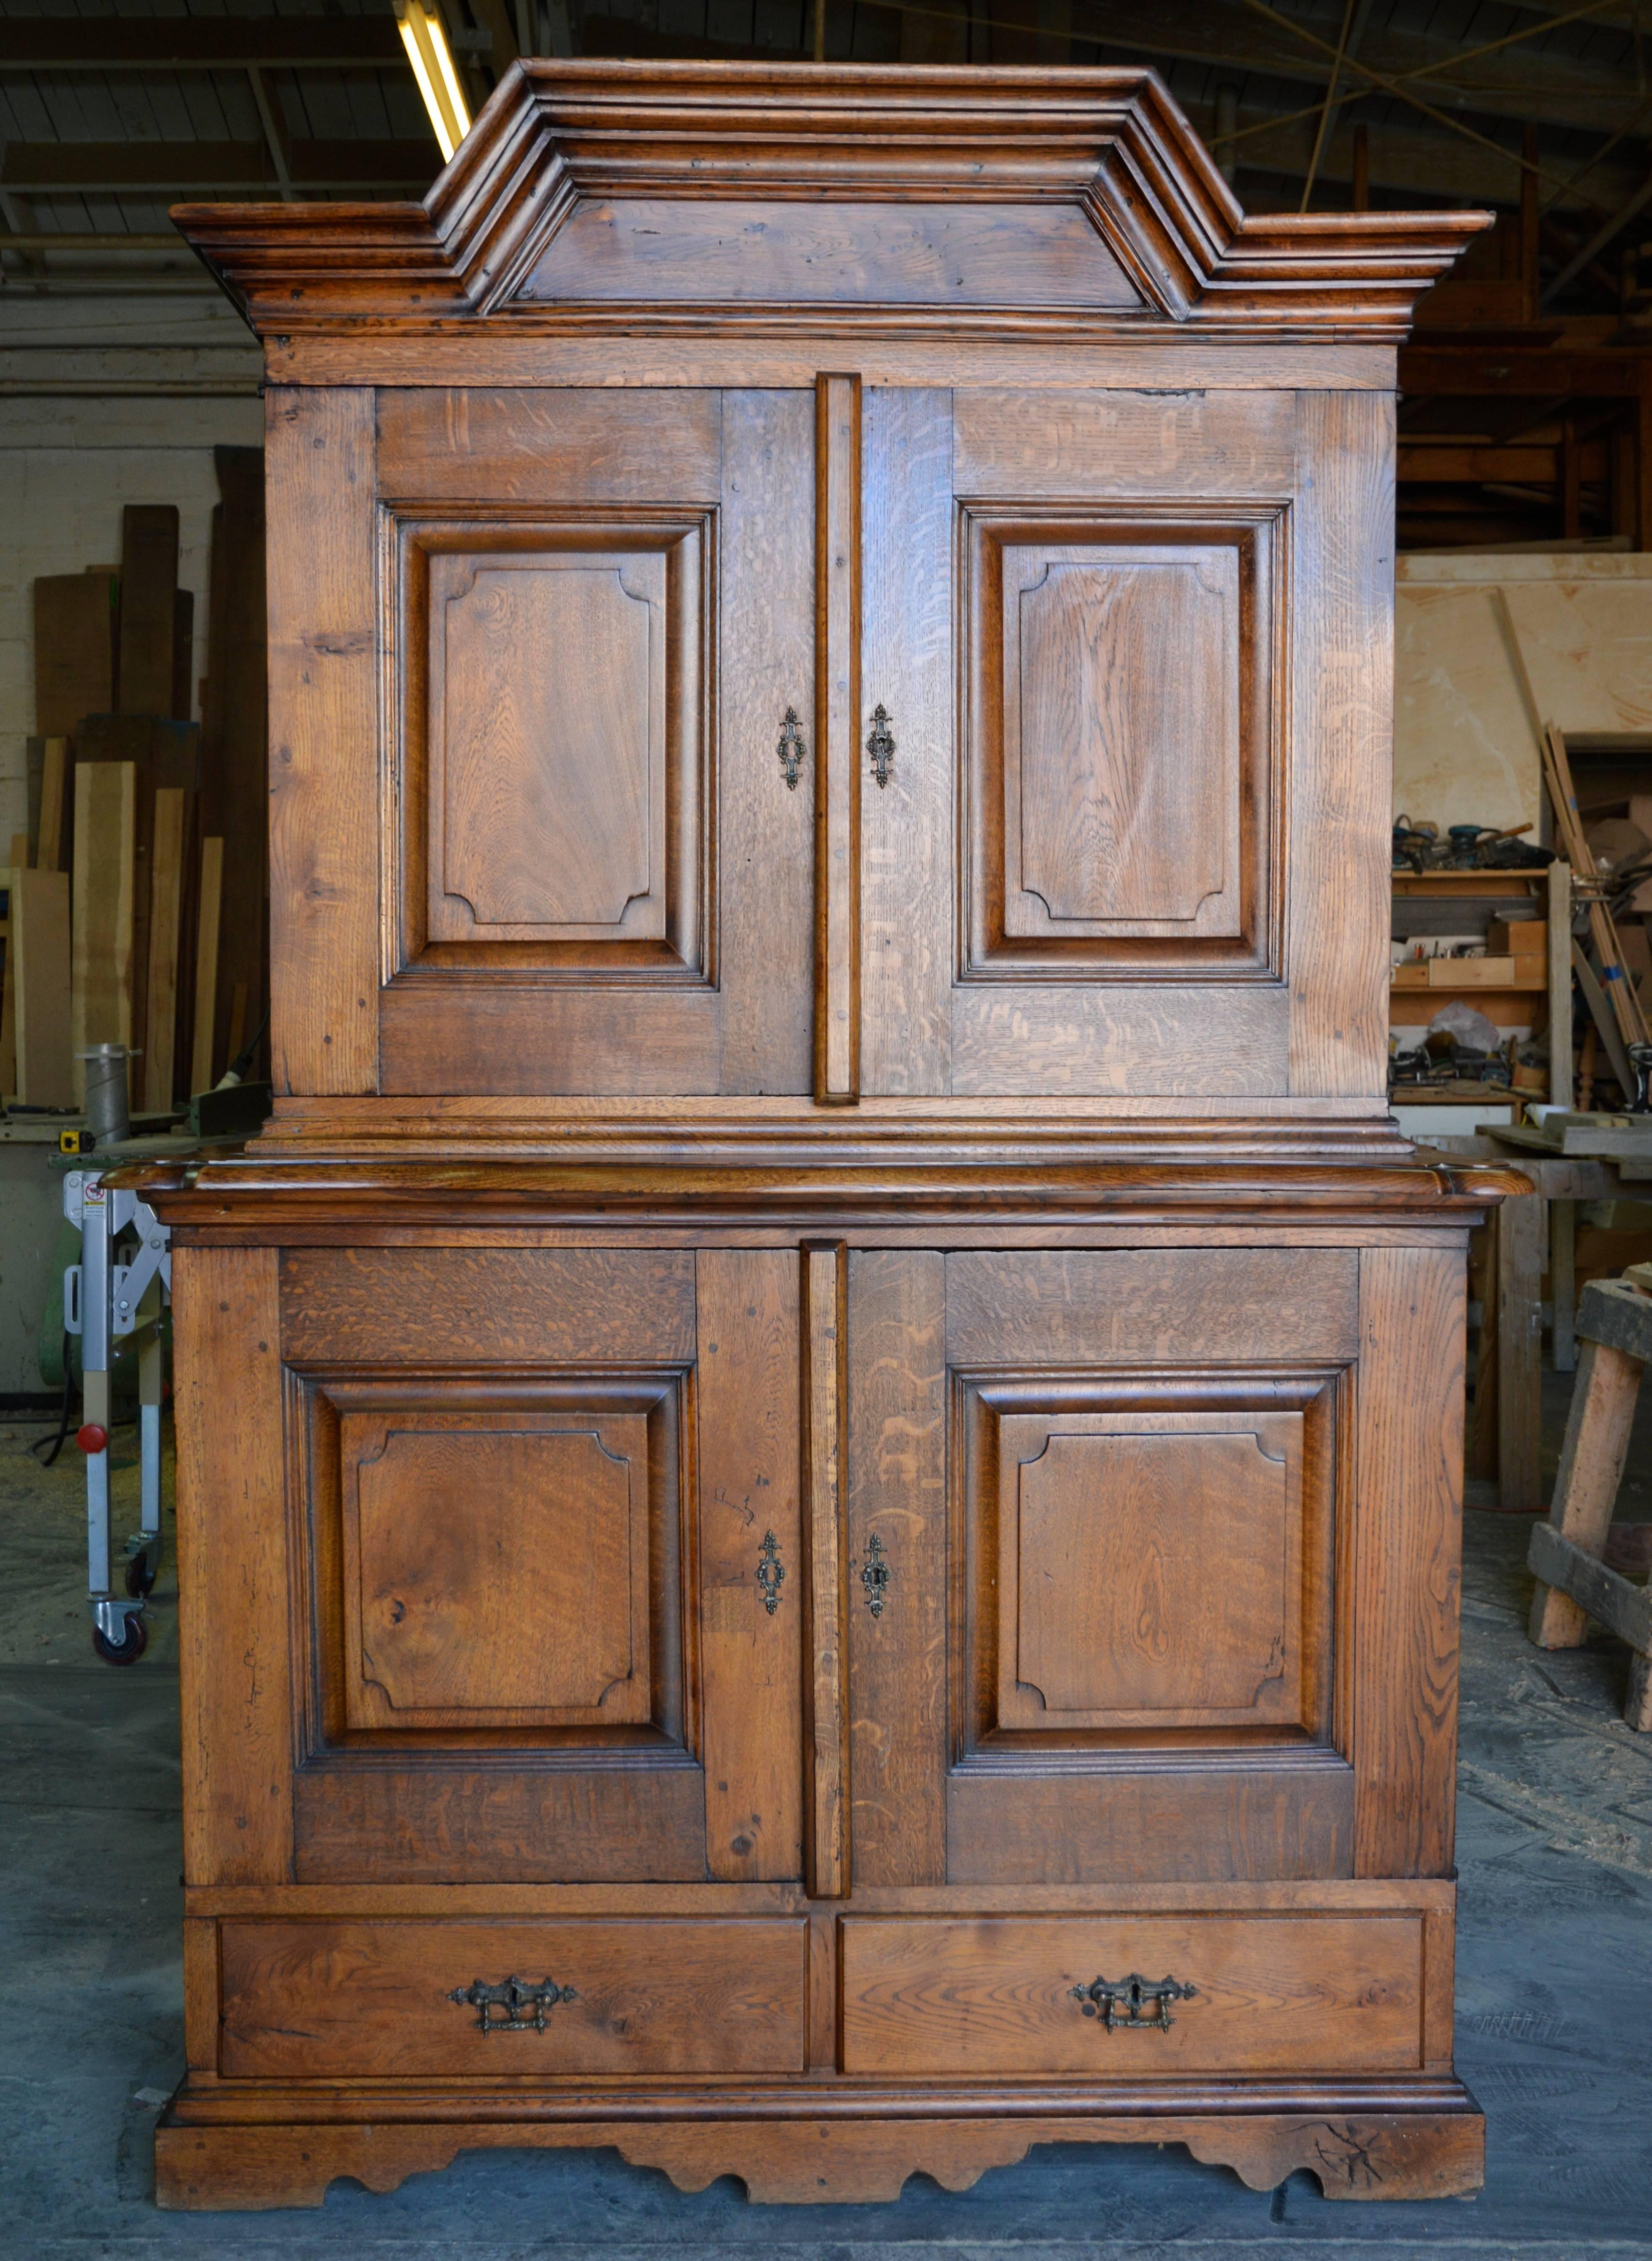 Step-back hutch in oak built in 1706 and restoration by A Johansson completed on March 4, 1905.